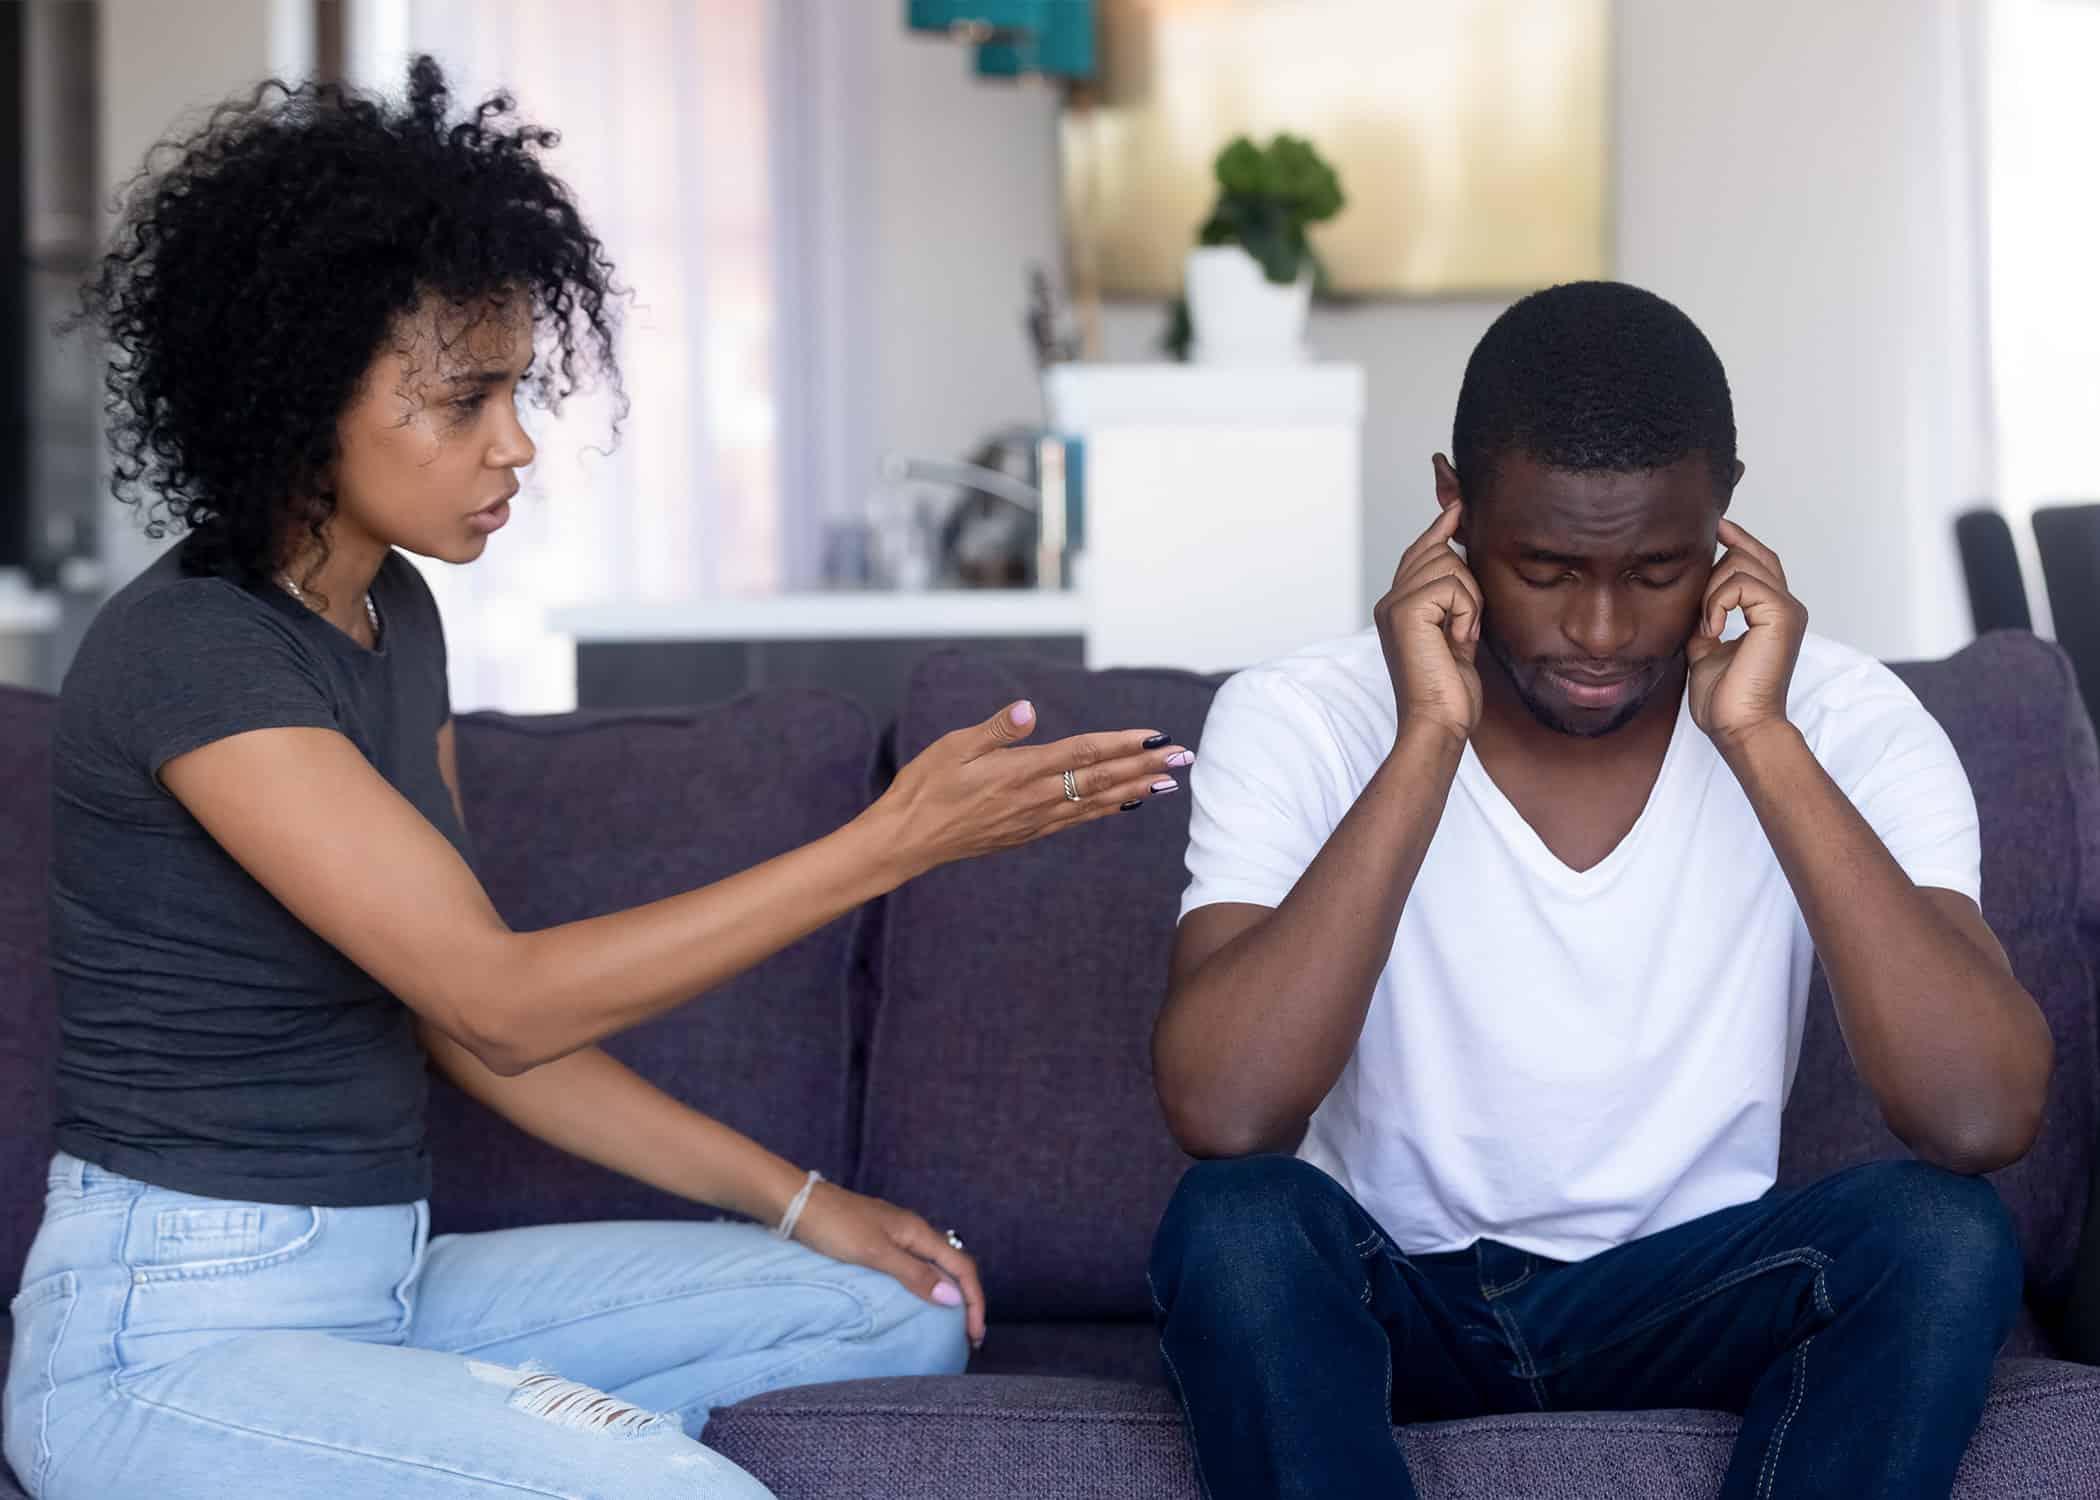 Is My Spouse Controlling or Just Caring? - Focus on the Family